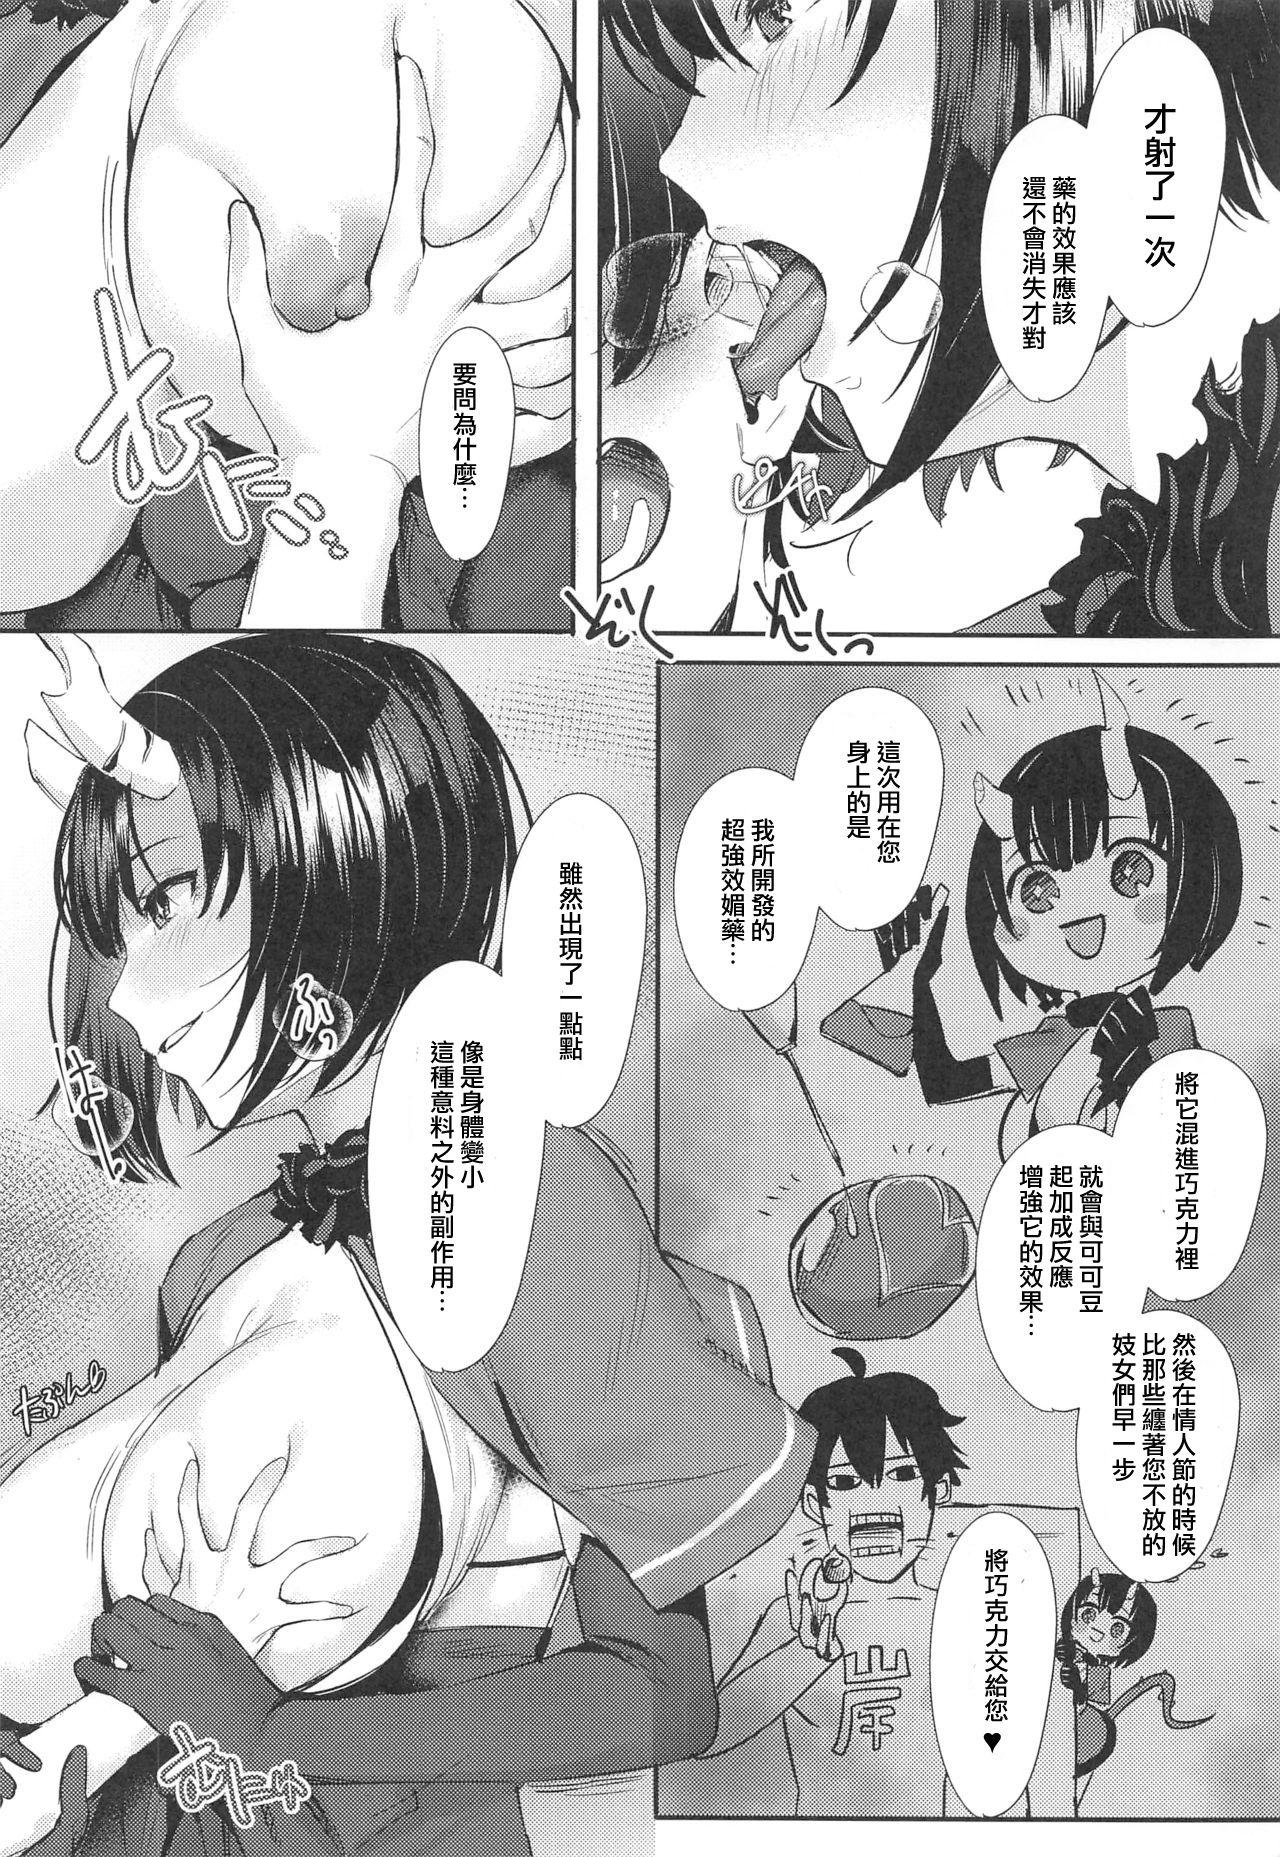 Fit Onee-chan Connect - Princess connect Internal - Page 6